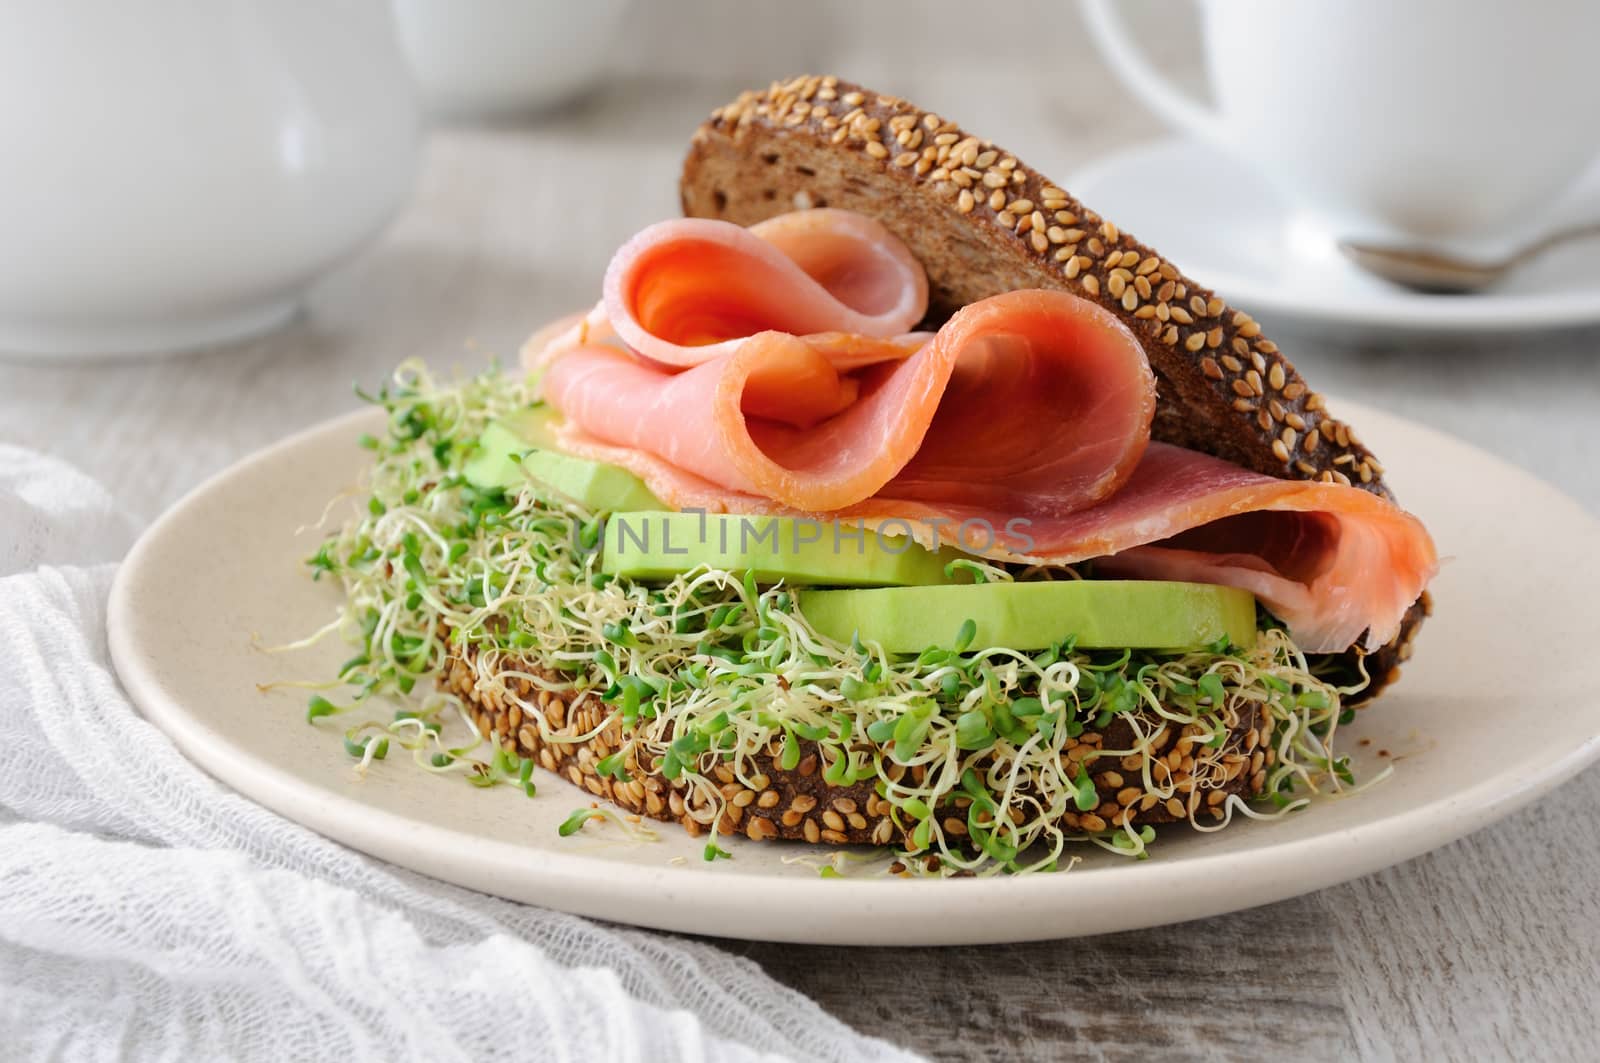 Sandwich of rye bread with cereals, slices of ham and avocado with sprouts of sprouted alfalfa.